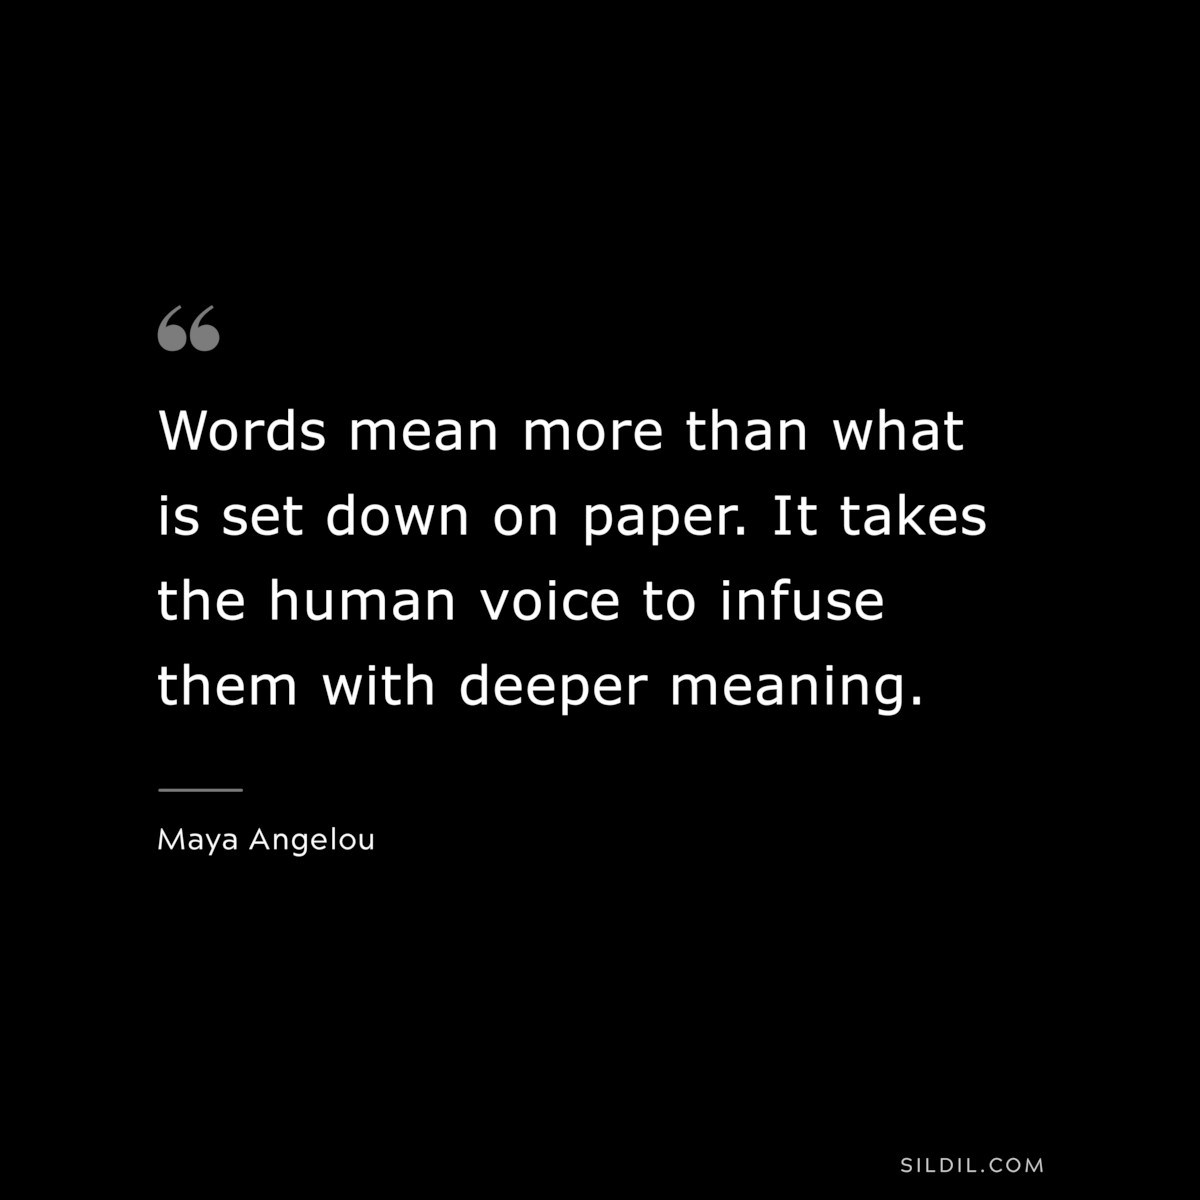 Words mean more than what is set down on paper. It takes the human voice to infuse them with deeper meaning. ― Maya Angelou